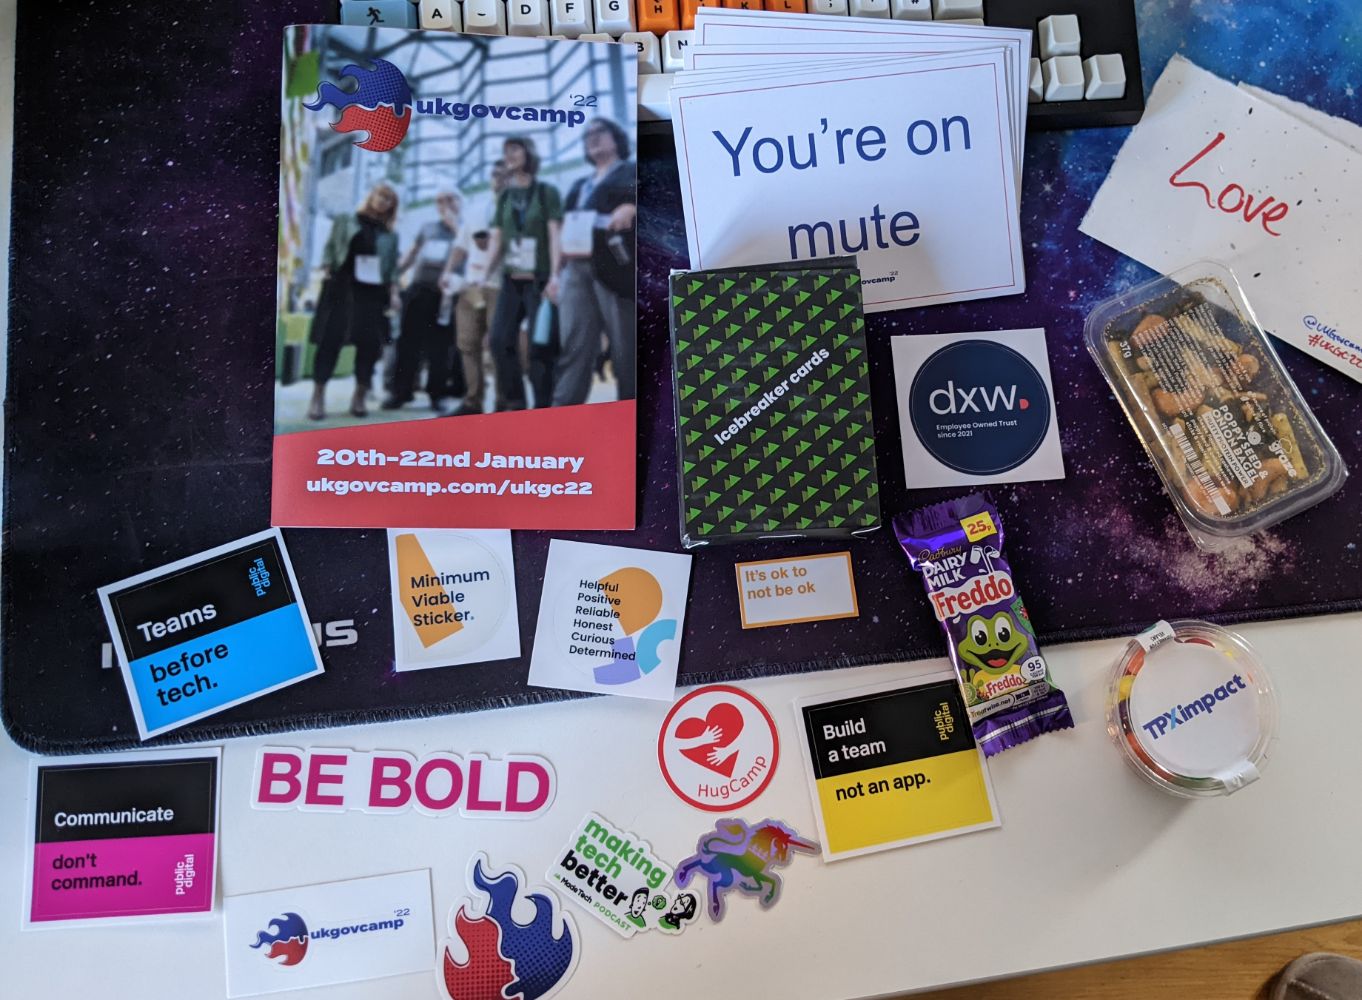 The contents of the swag box laid out, with a dozen stickers, a few snacks, some icebreaker cards, the agenda for the event, cue cards such as "you're on mute"